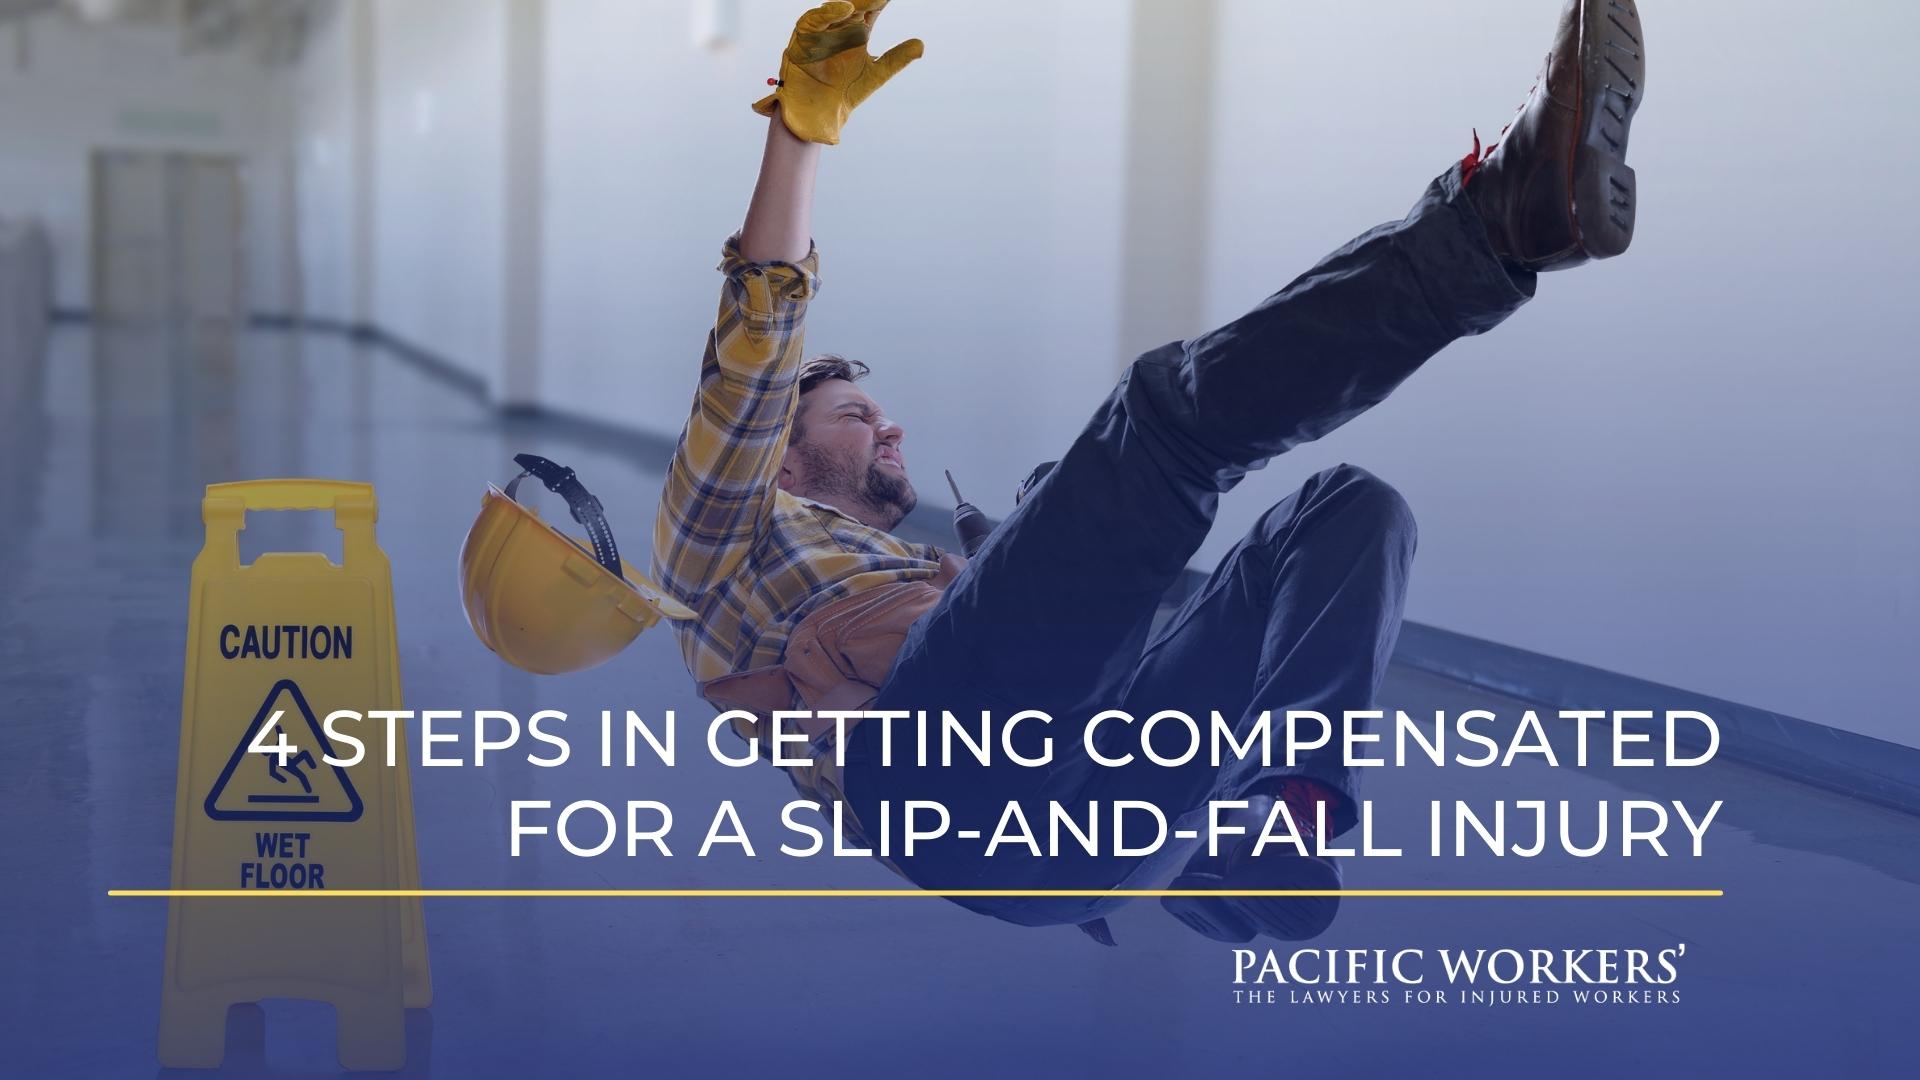 4 Steps in Getting Compensated For a Slip-and-Fall Injury